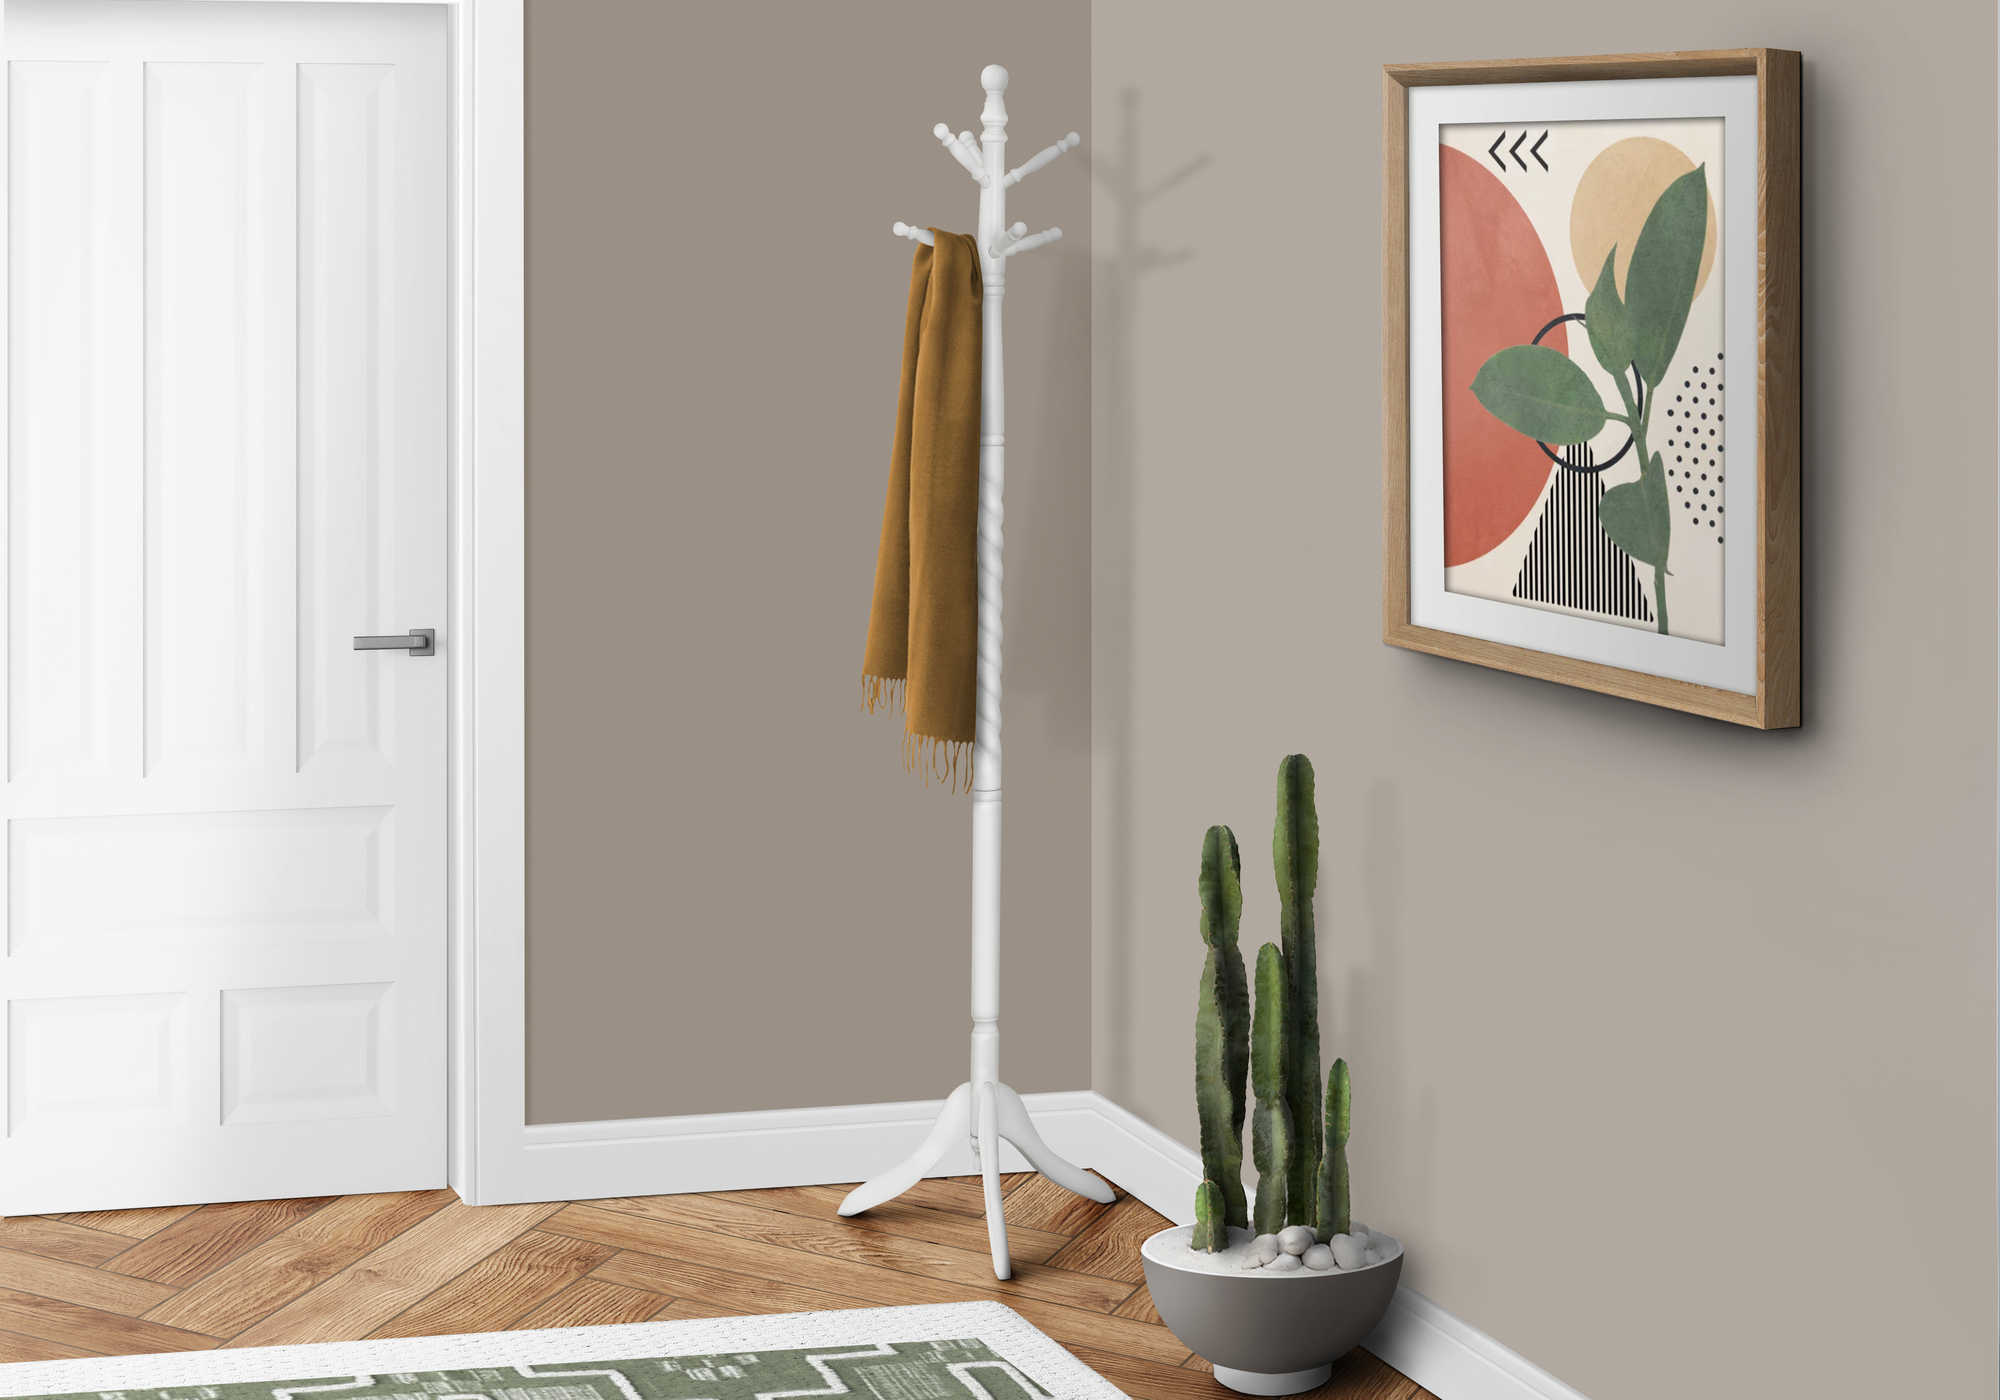 COAT RACK - 72"H / ANTIQUE WHITE WOOD TRADITIONAL STYLE